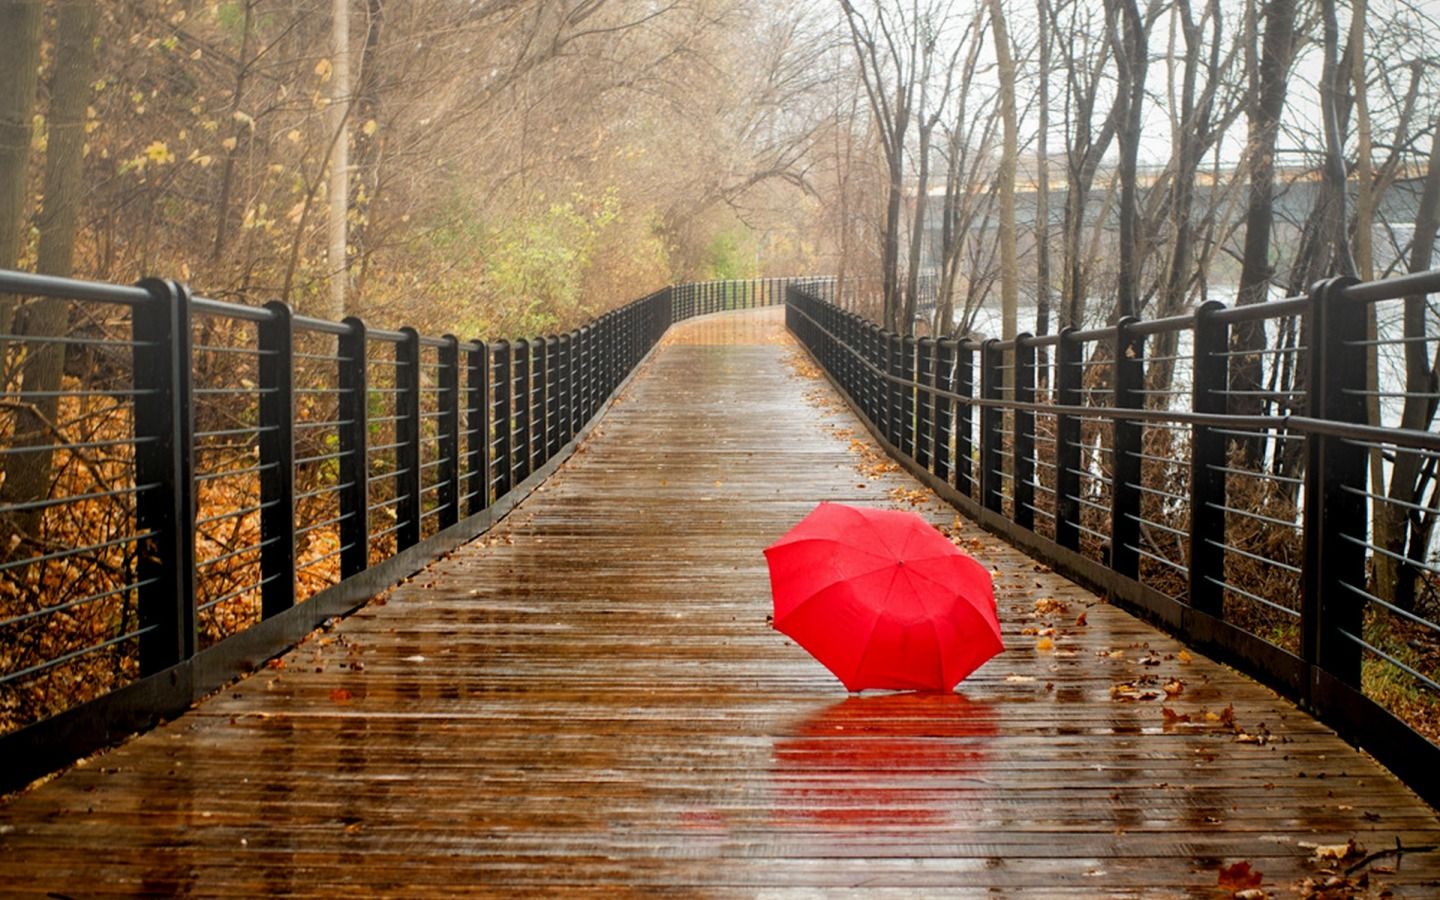 The Ultimate Fall Rainy Day Playlist. Rainy day picture, Red umbrella, Rainy day